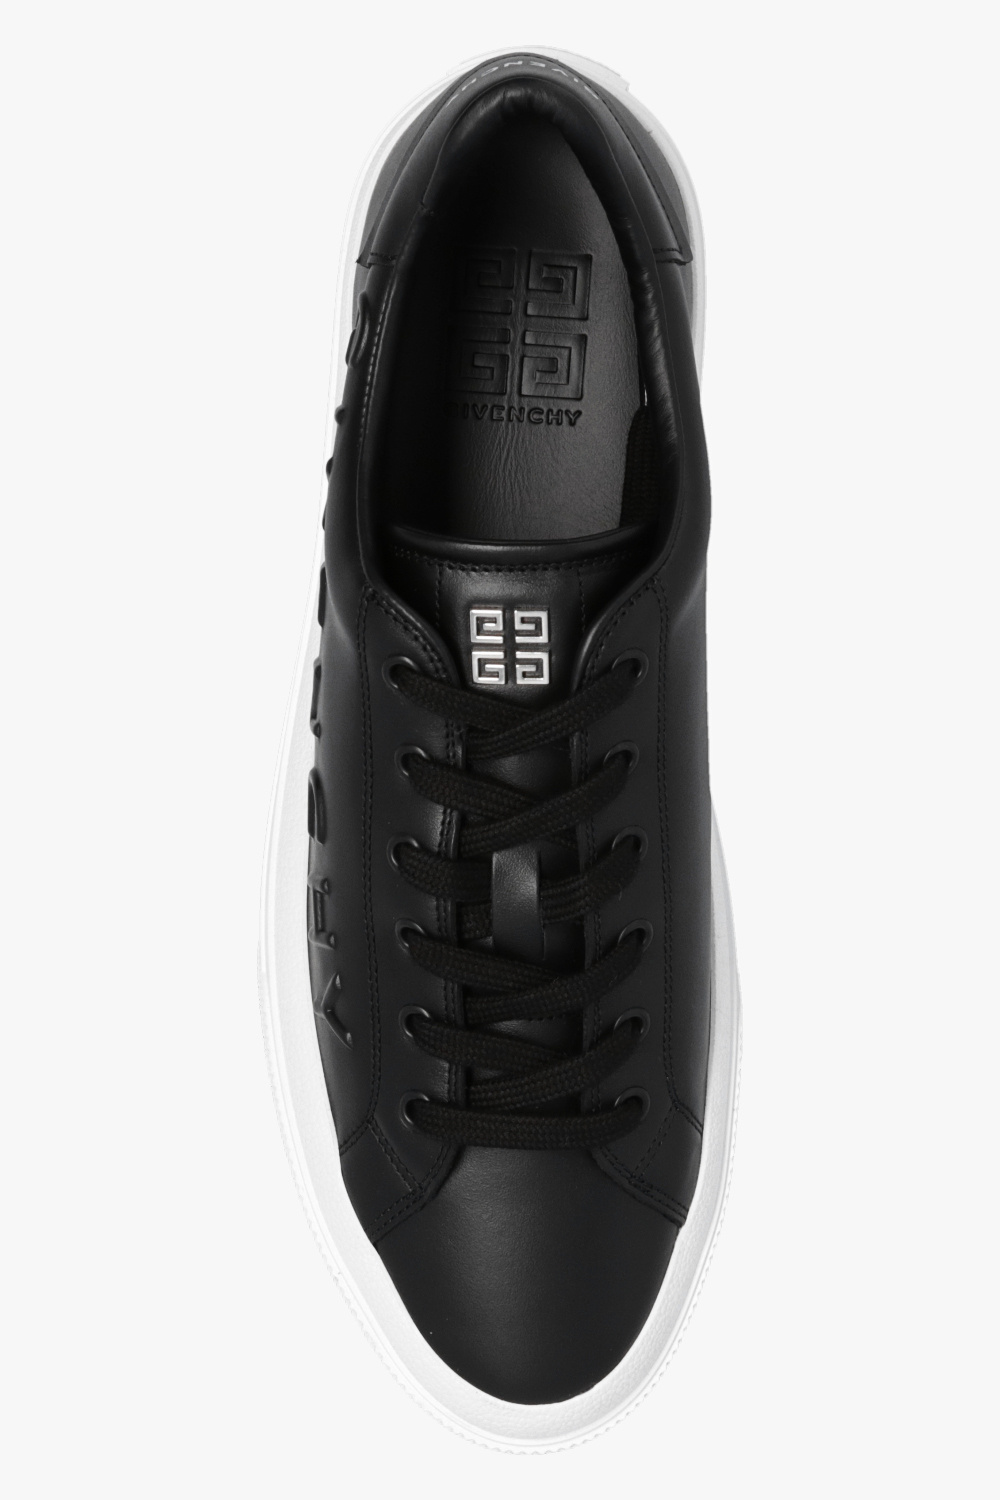 givenchy SWEATSHIRT ‘City Sport’ sneakers